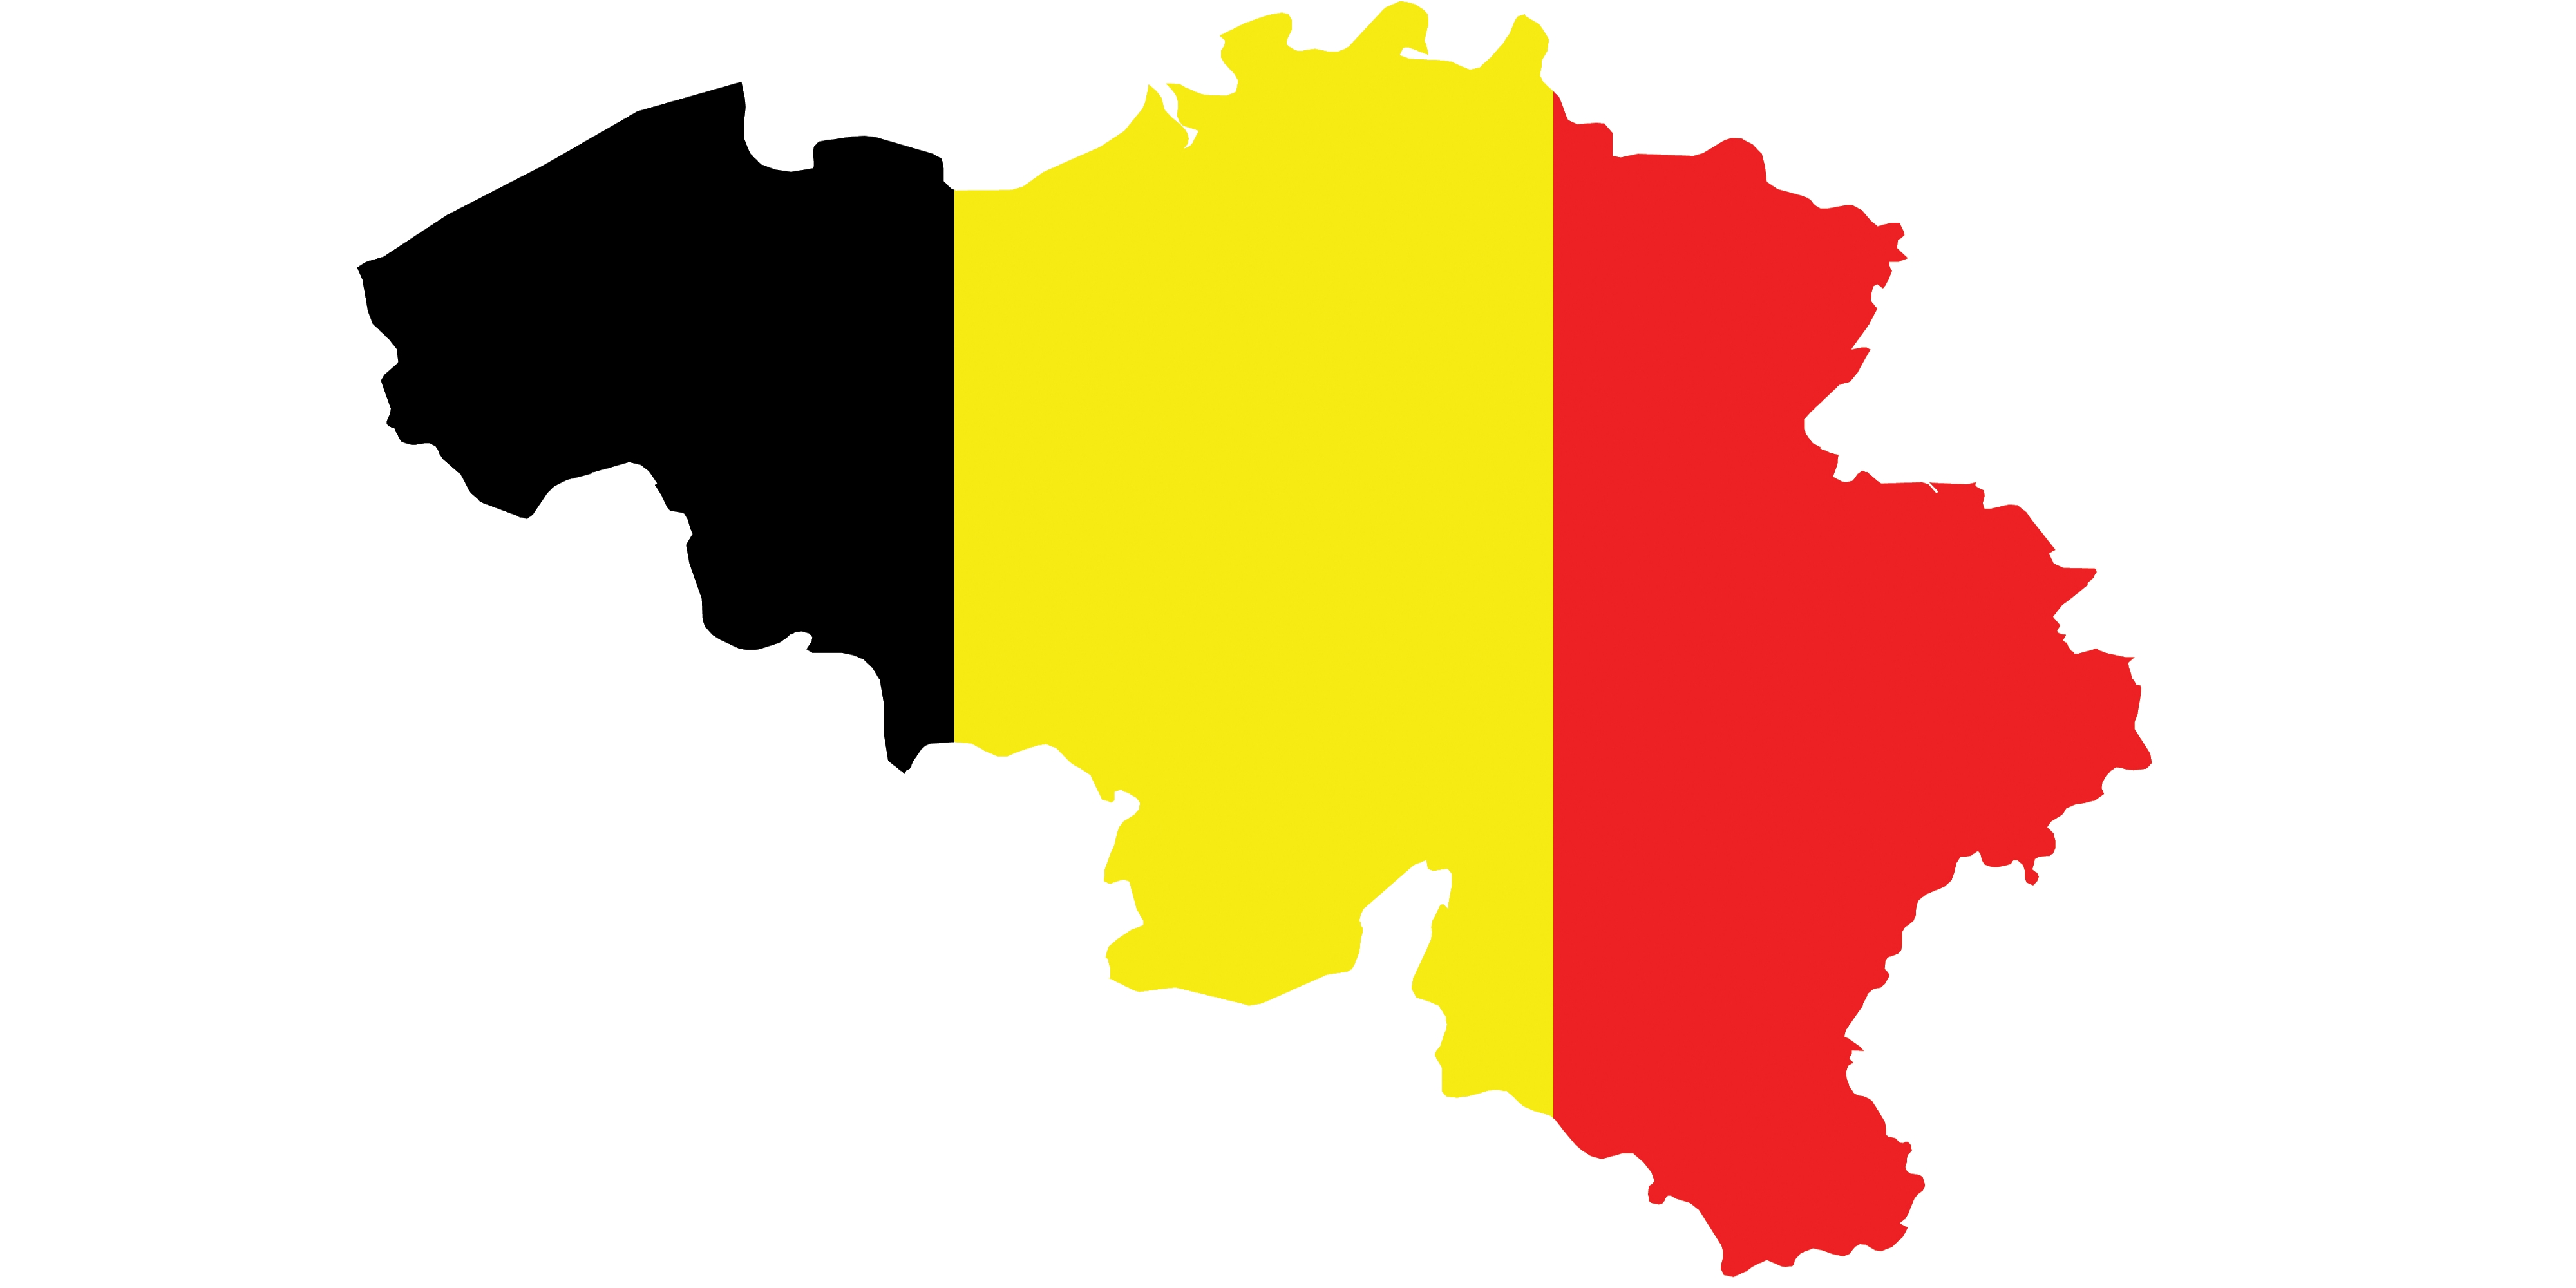 Belgium: The Short Story of a Long History of (In)Stability